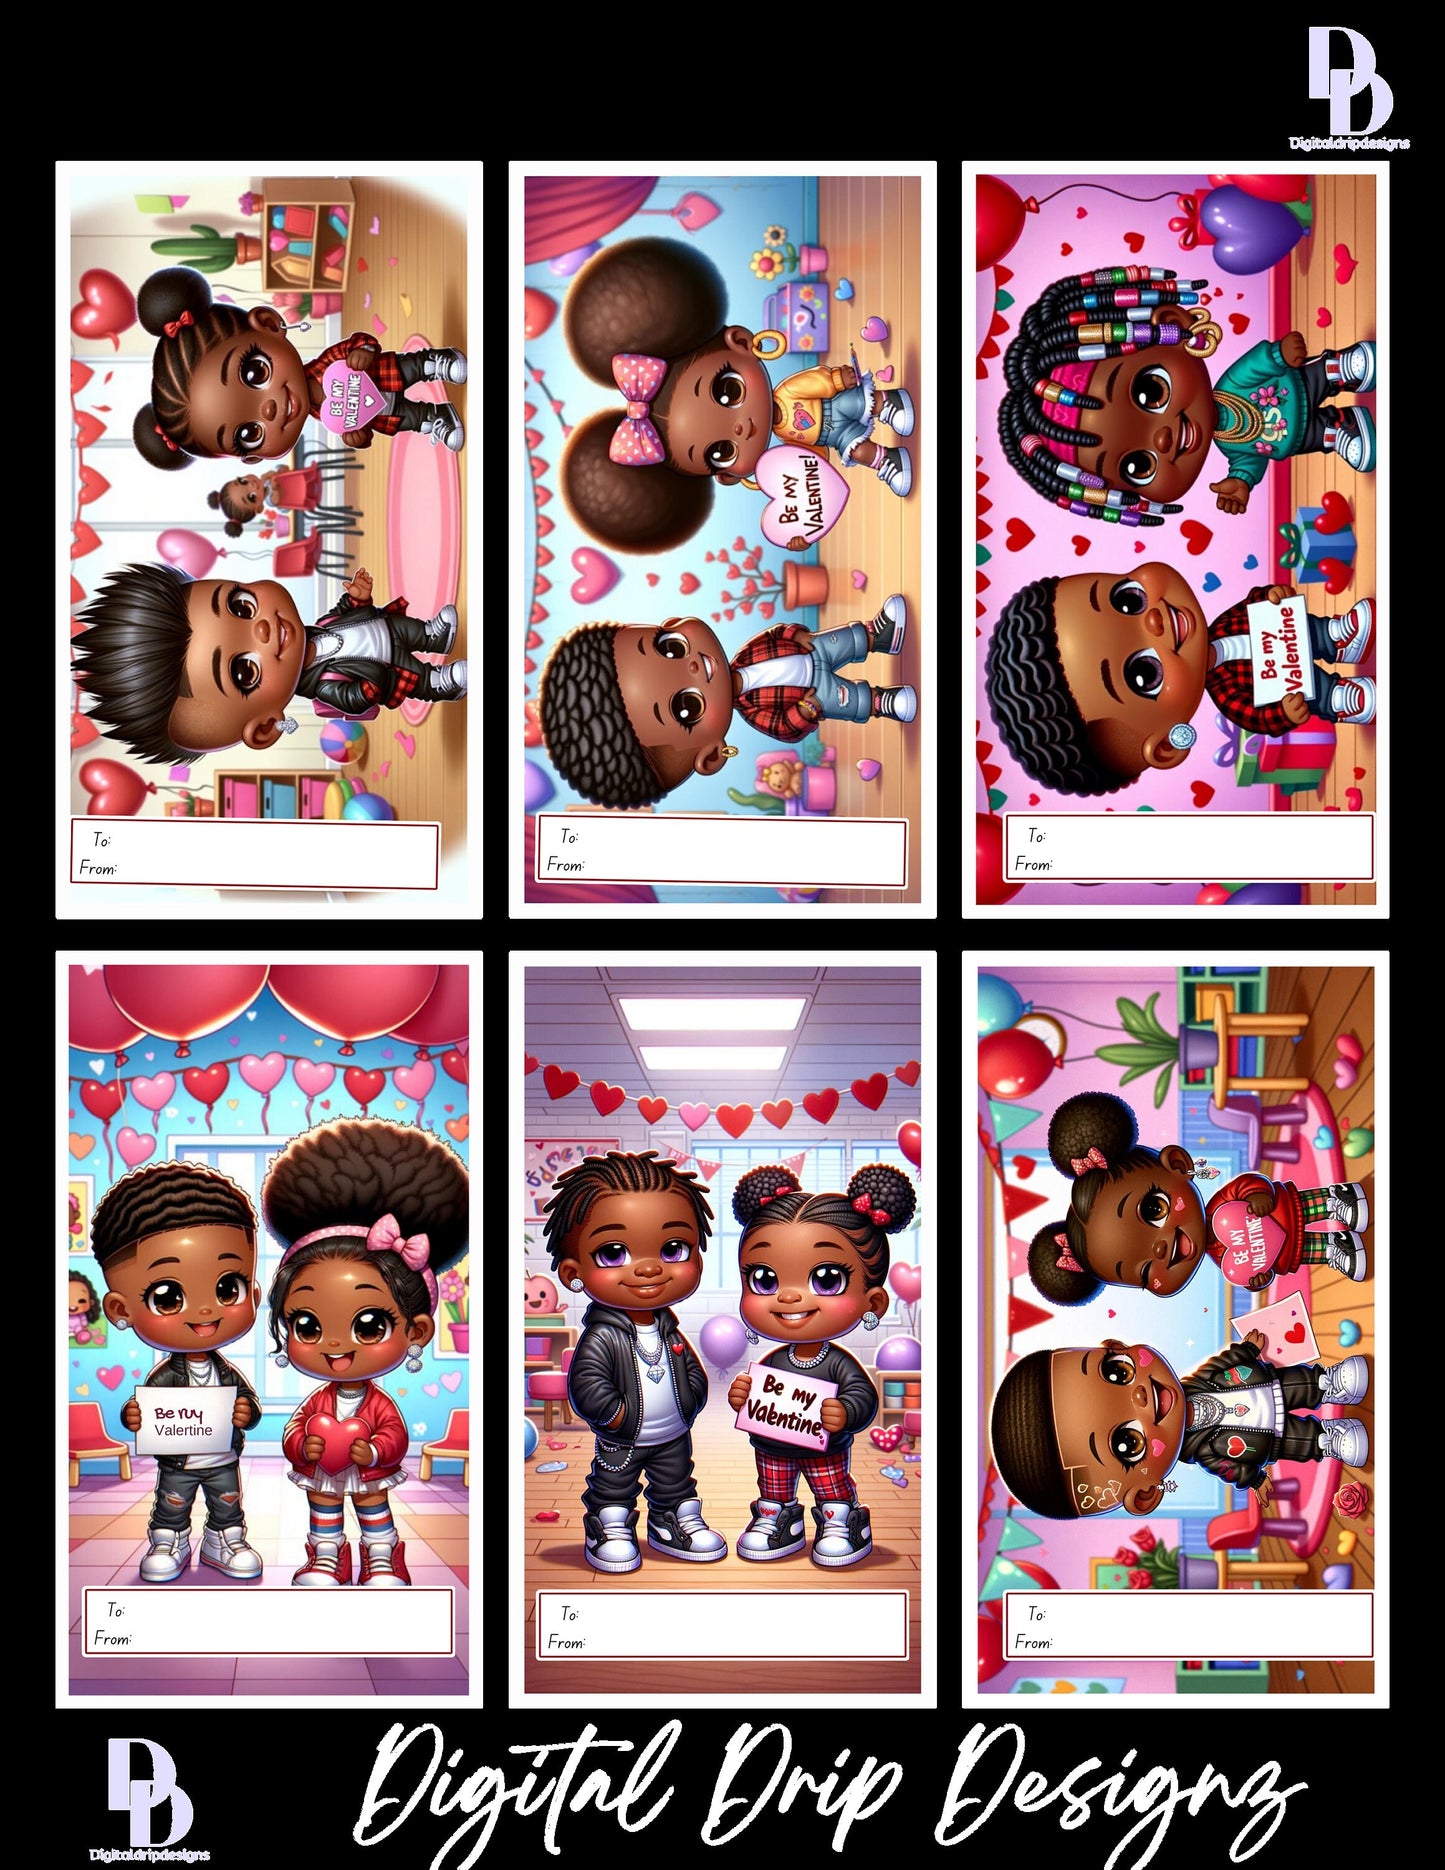 Be My Valentine’s? Pre-k Valentine Day!| Chibi Love in the Nursery. Cards|DFY| Culture Cards| African American Love